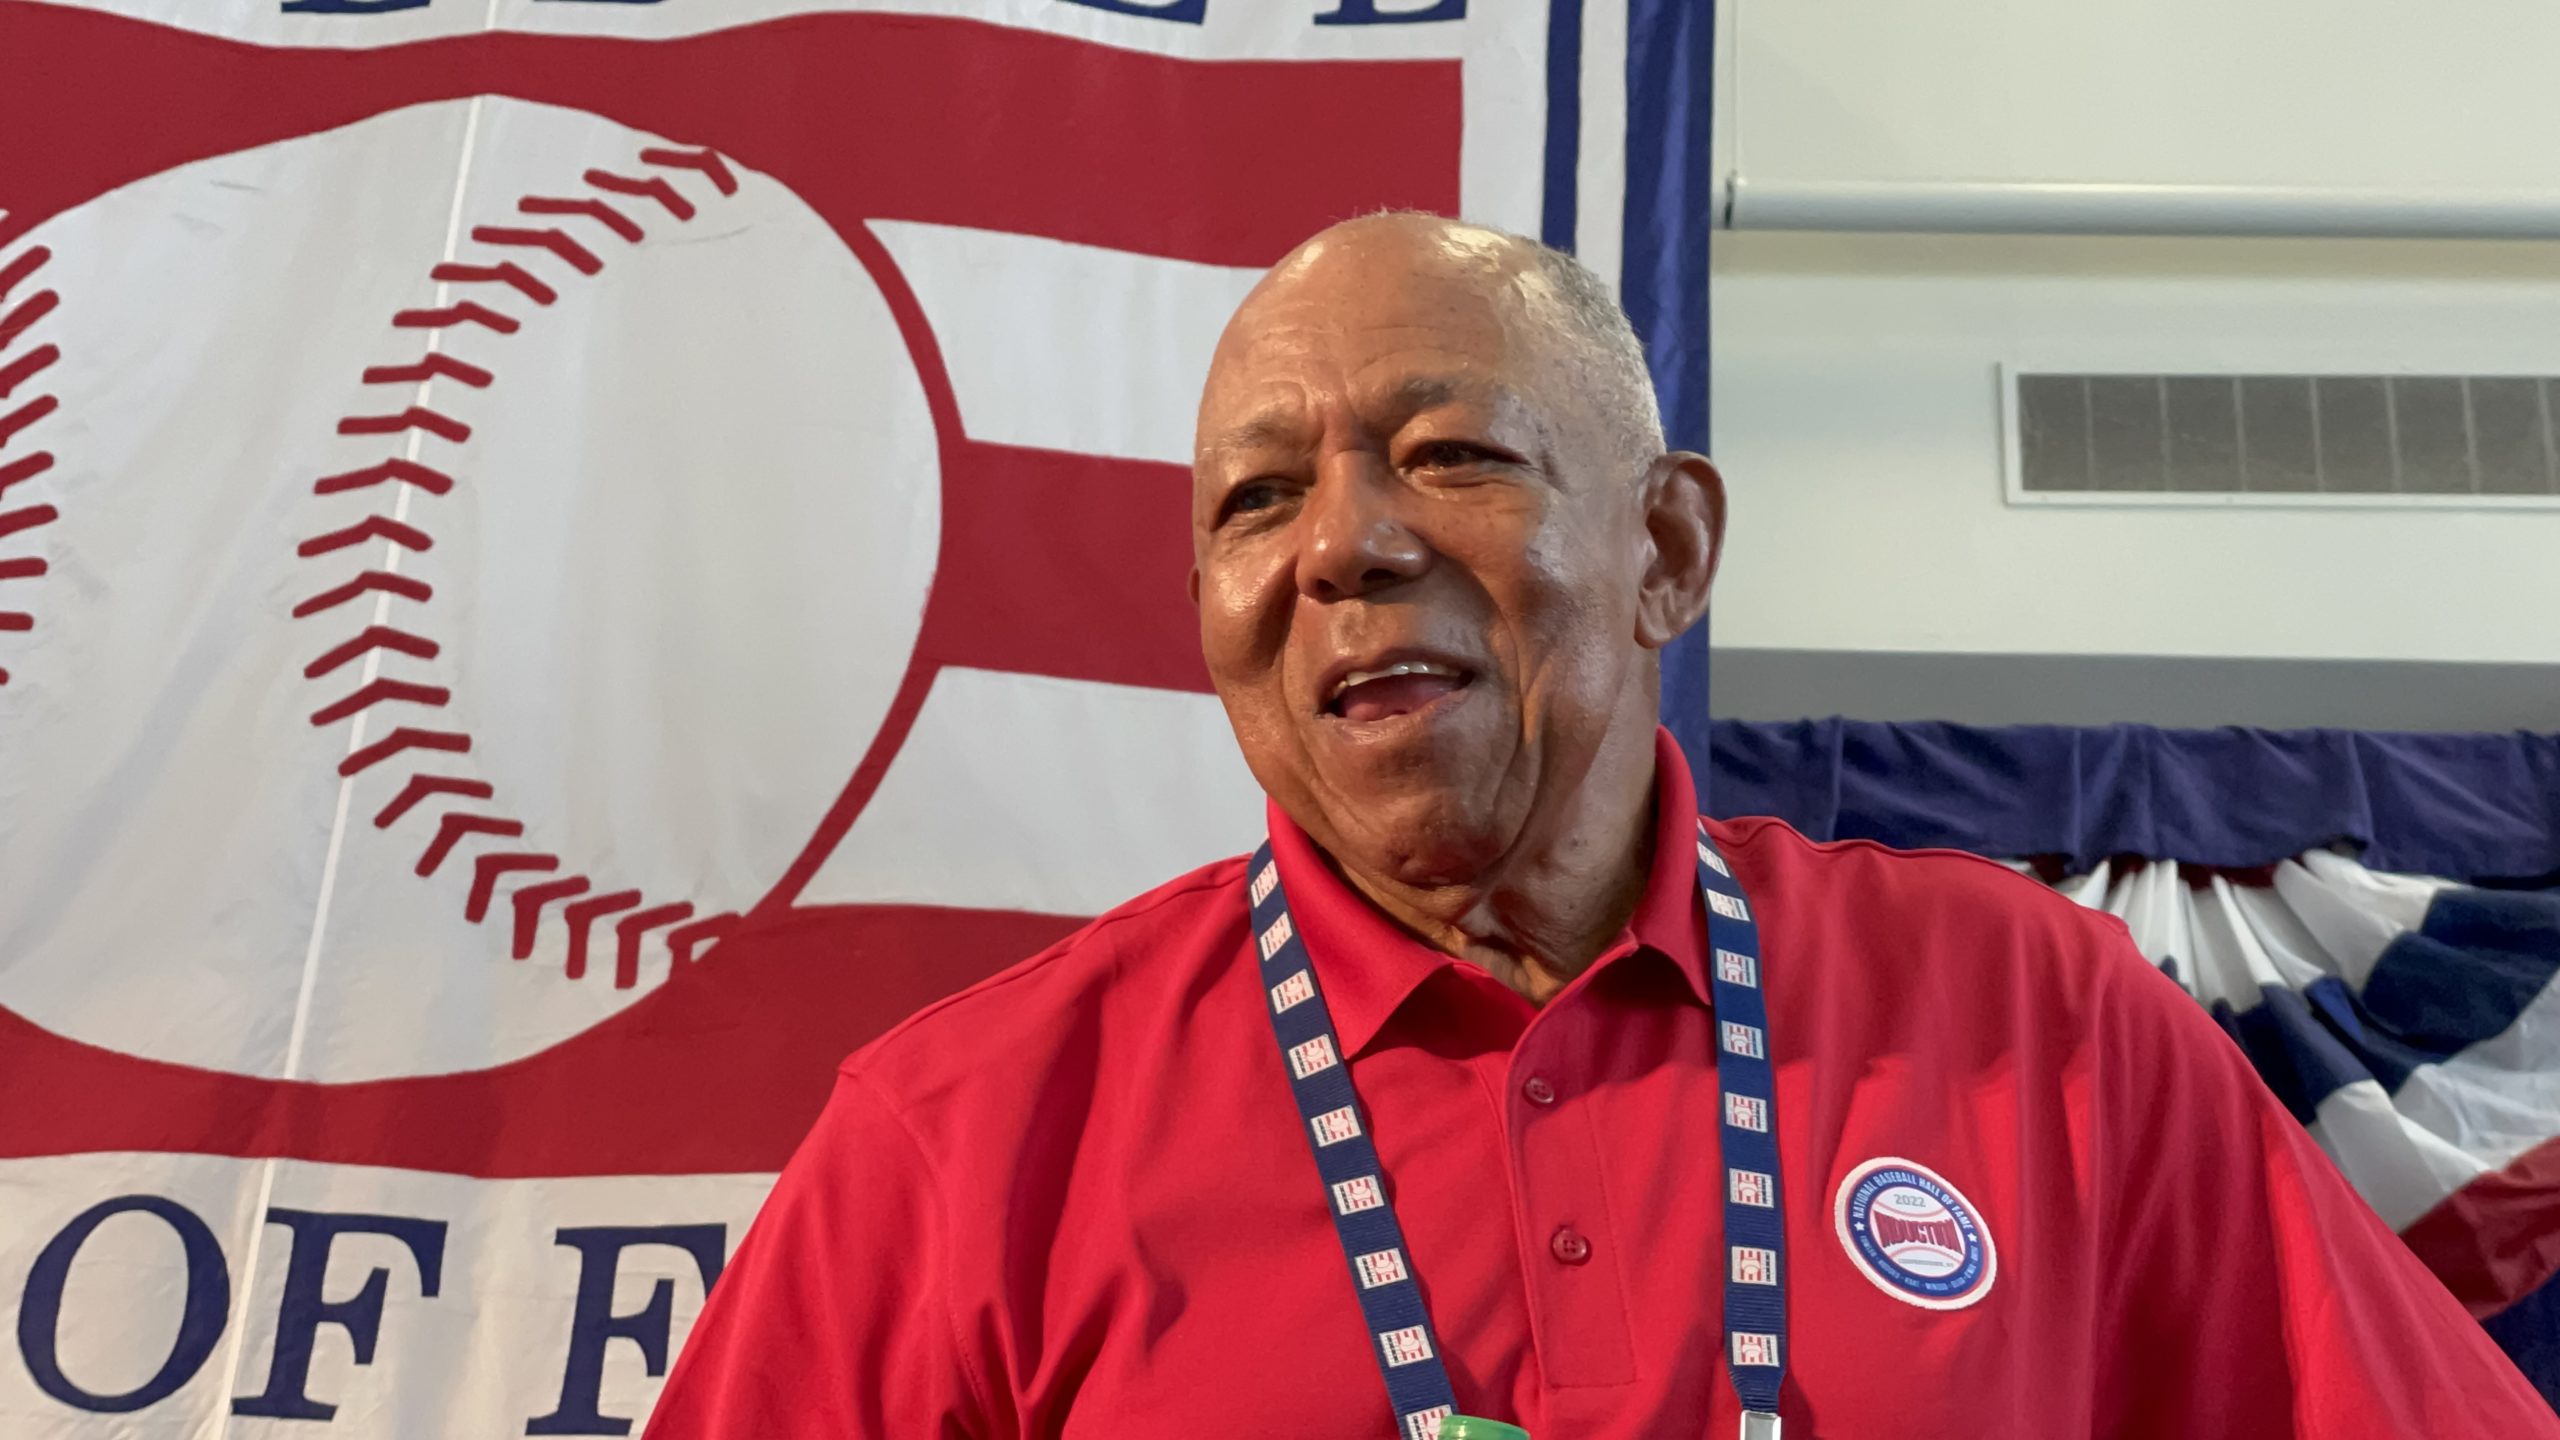 Tony Oliva glad brother can attend induction - Our Esquina